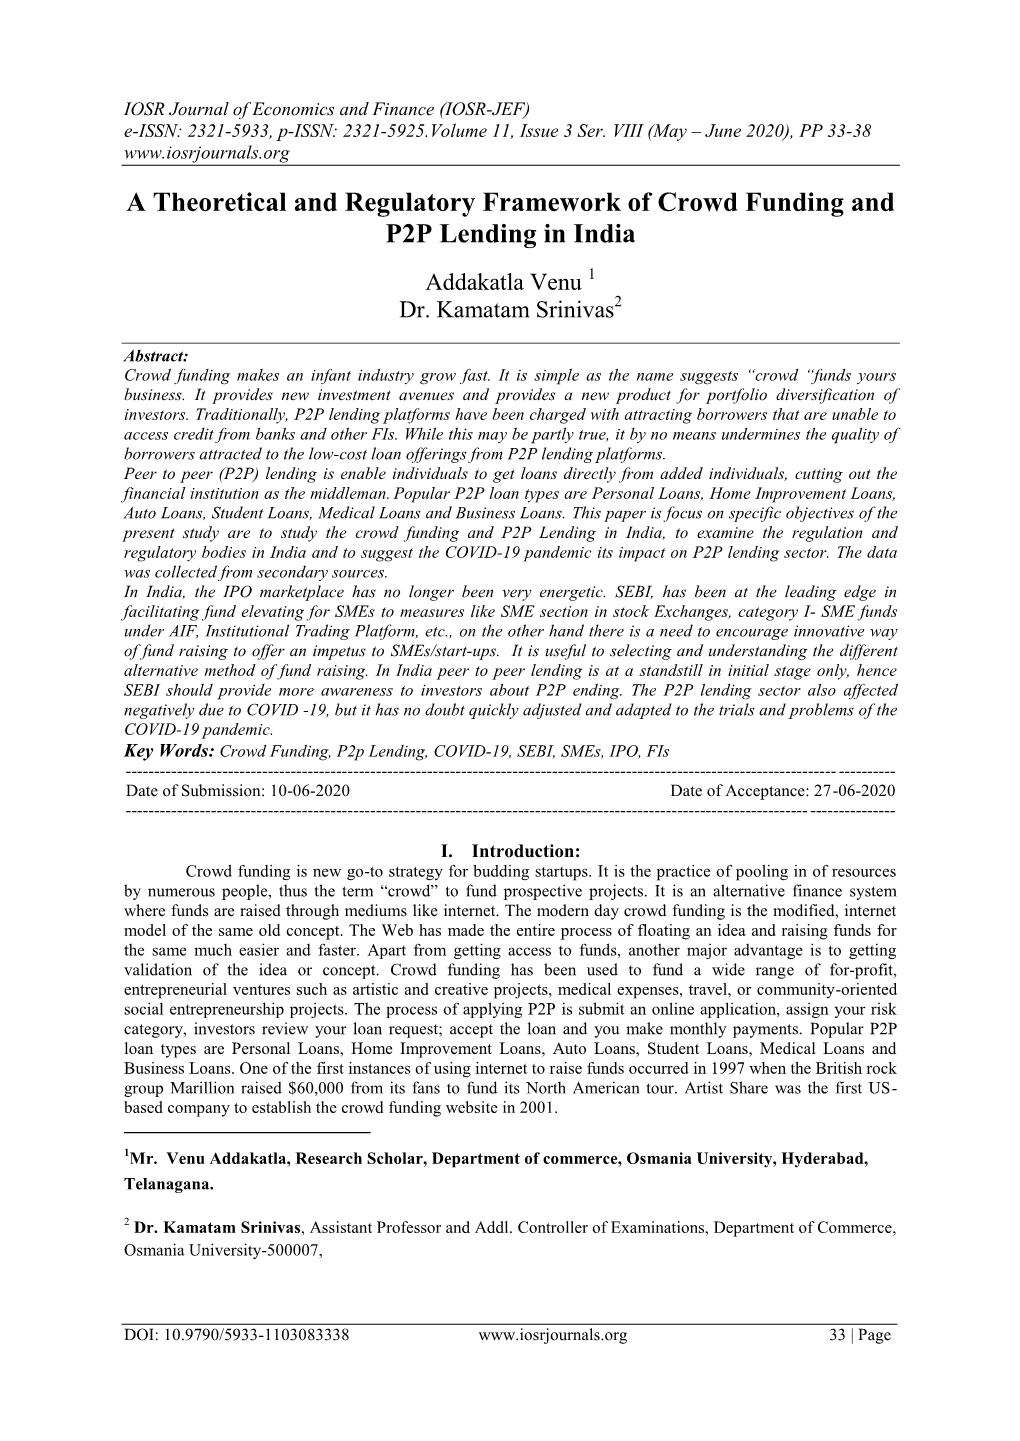 A Theoretical and Regulatory Framework of Crowd Funding and P2P Lending in India